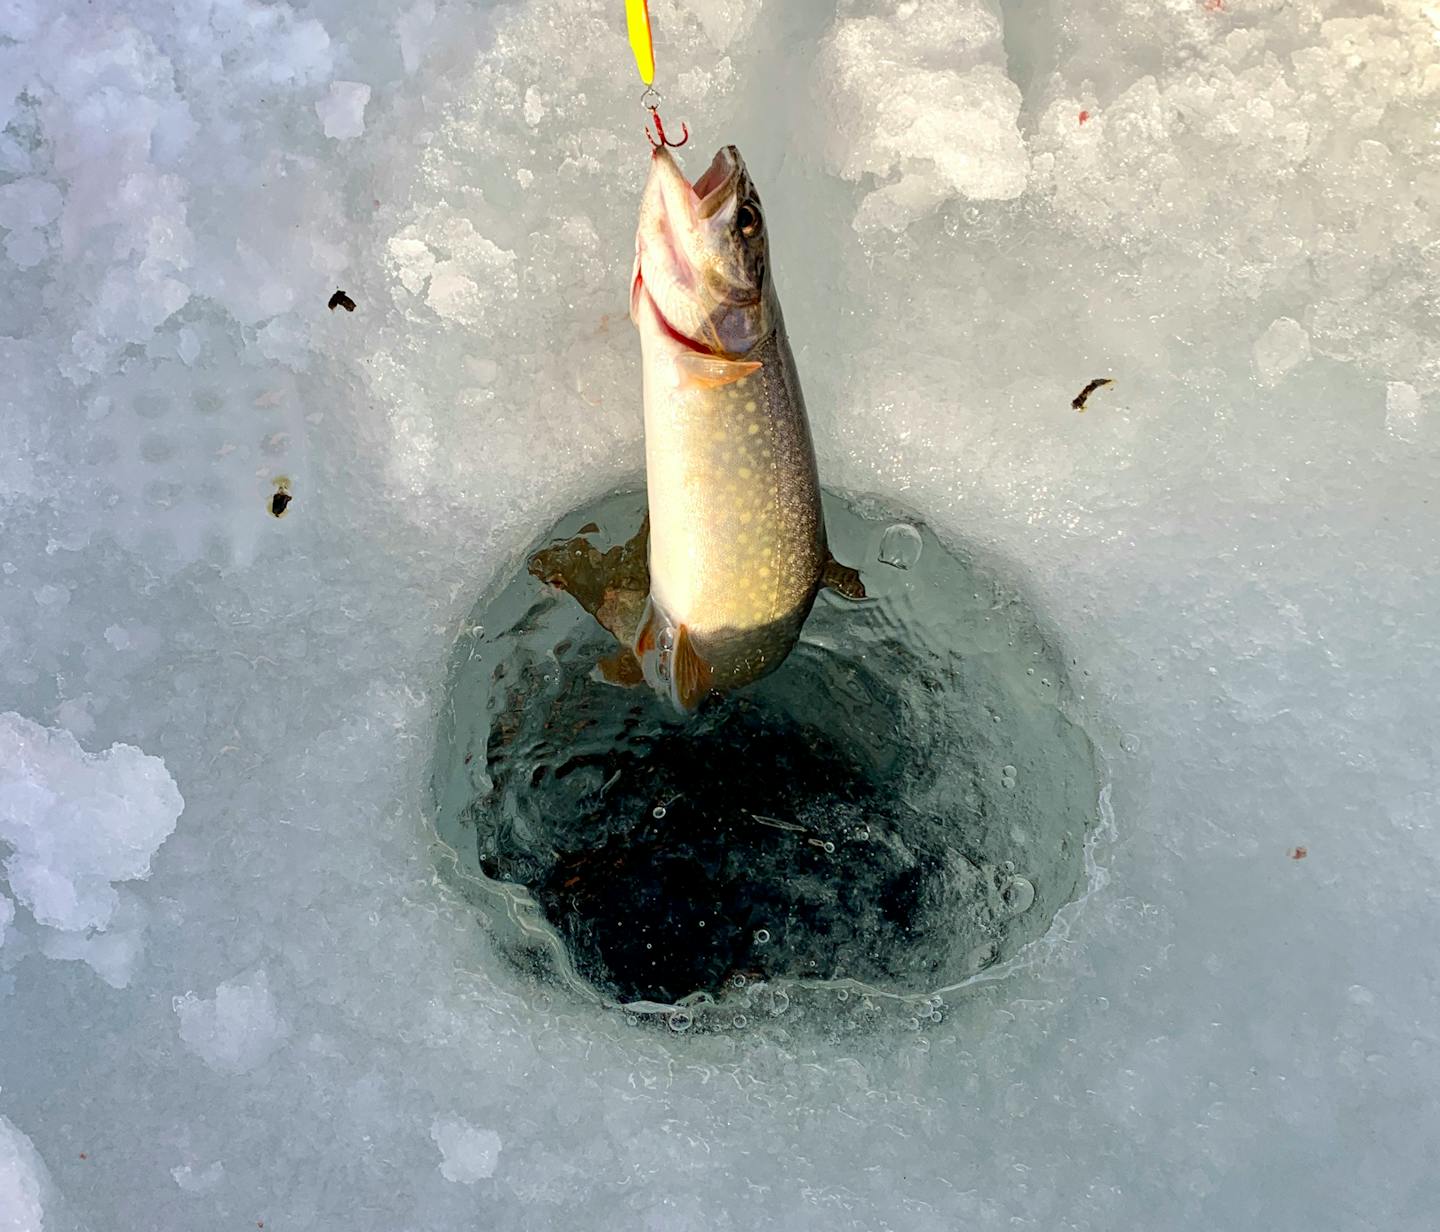 A venture off the Gunflint Trail leads, through snow and over thick ice, to  lake trout